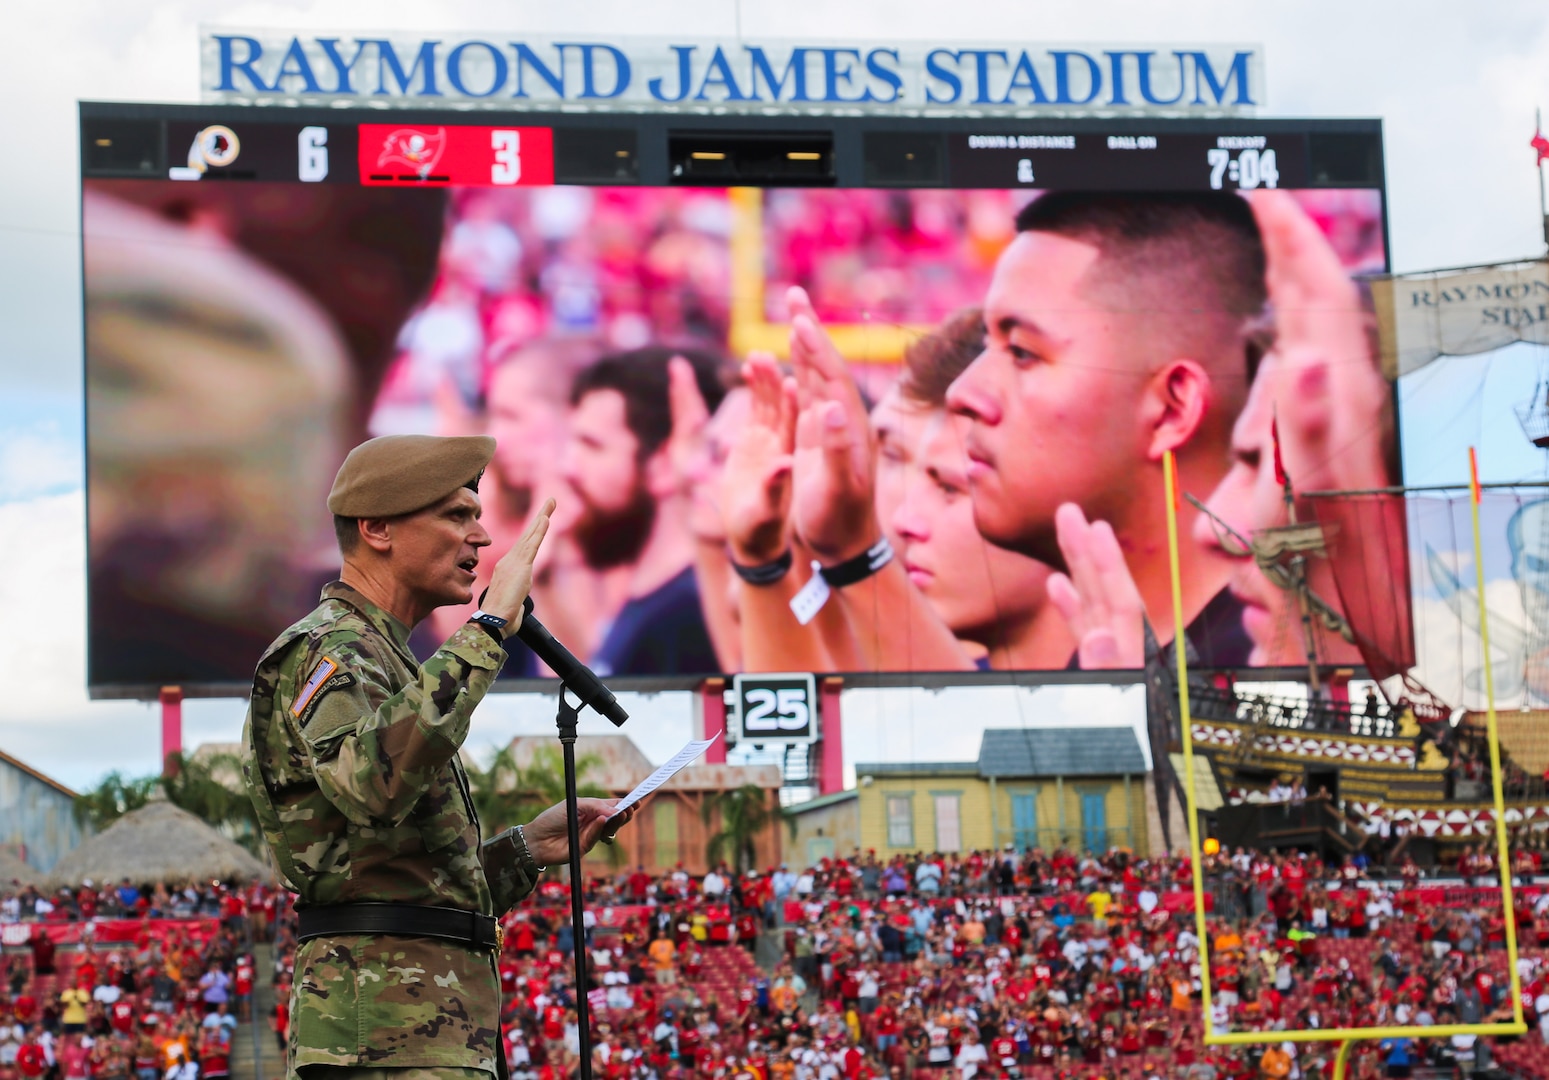 U.S. Army Gen. Joseph Votel, commander, U.S. Central Command, administers the Oath of Enlistment to approximately 130 future service members during a ceremony at Raymond James Stadium, Nov. 11th, 2018. The enlistees were provided a unique opportunity to take the Oath of Enlistment in front of thousands of football fans, during halftime of the Tampa Bay Buccaneers home game versus the Washington Redskins. (U.S. Central Command Public Affairs photo by Tom Gagnier)